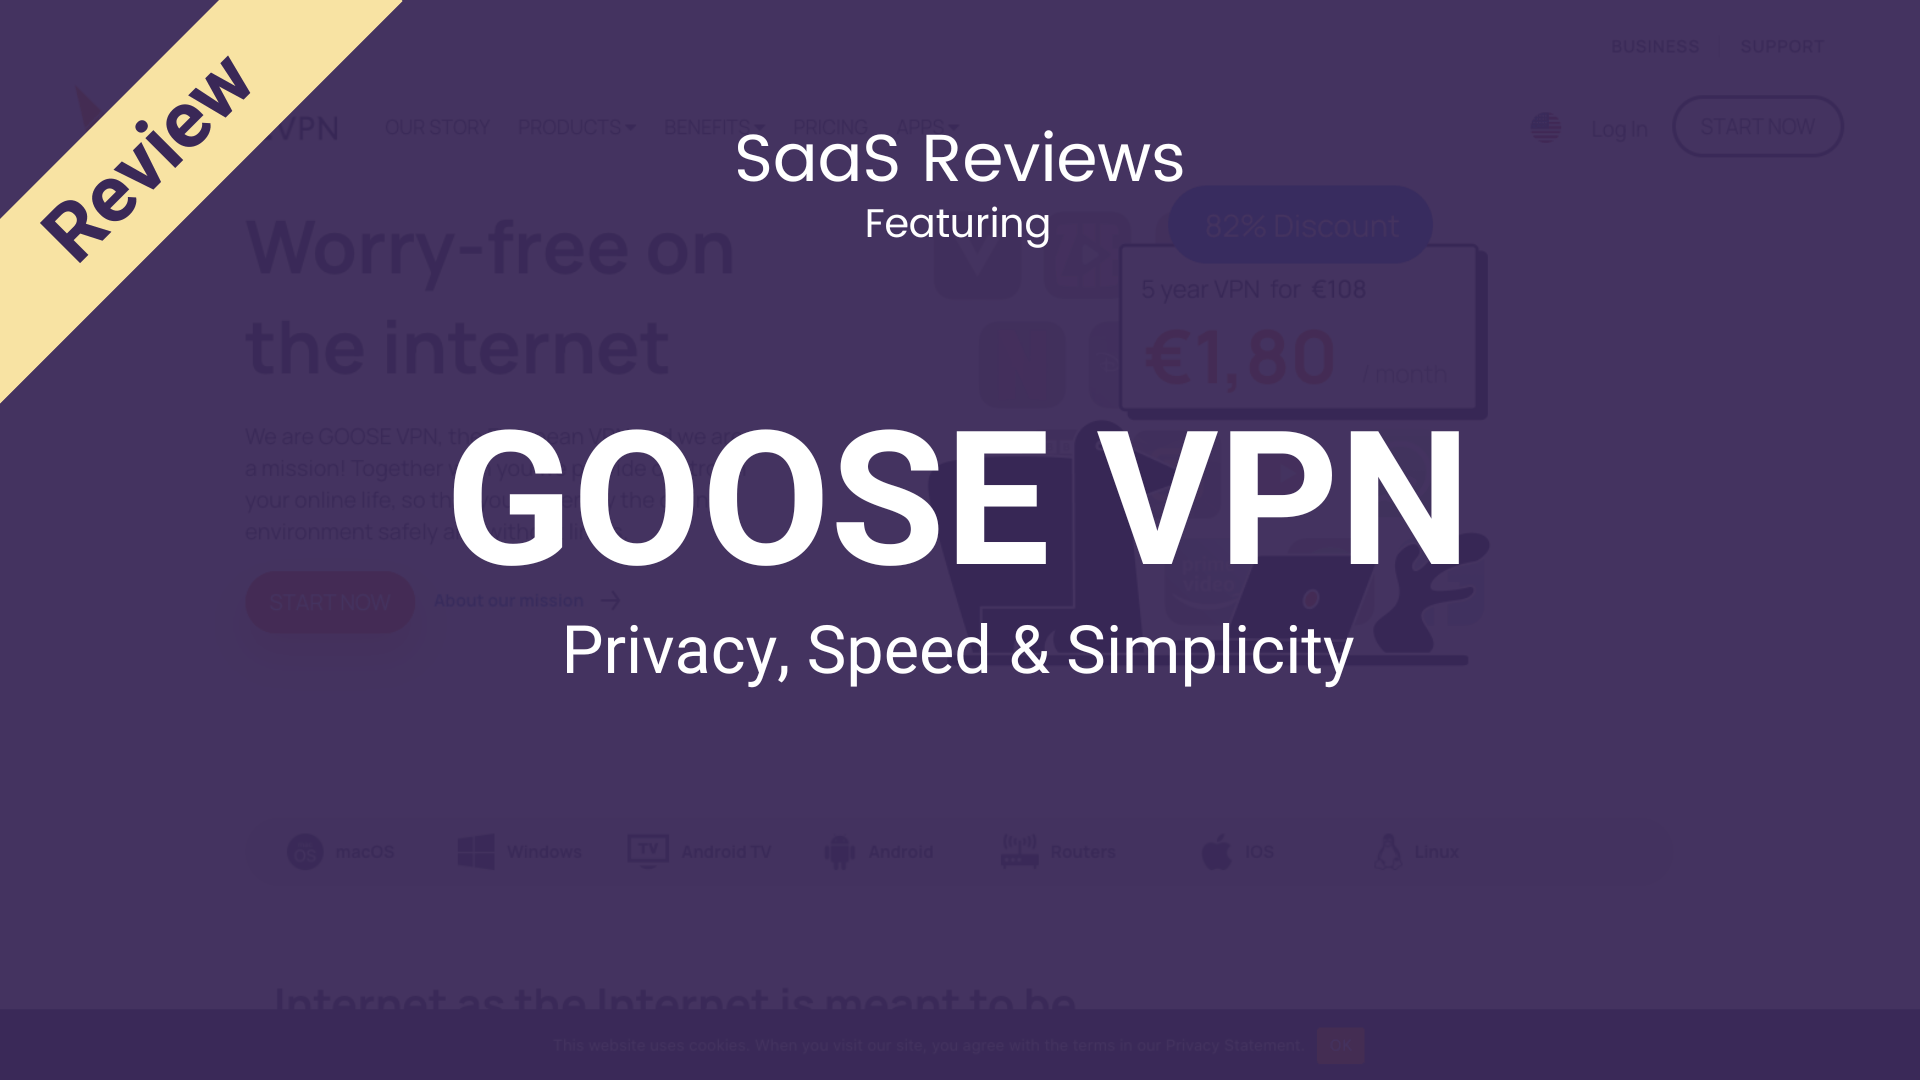 GOOSE VPN Review: Online Privacy, Speed & Simplicity